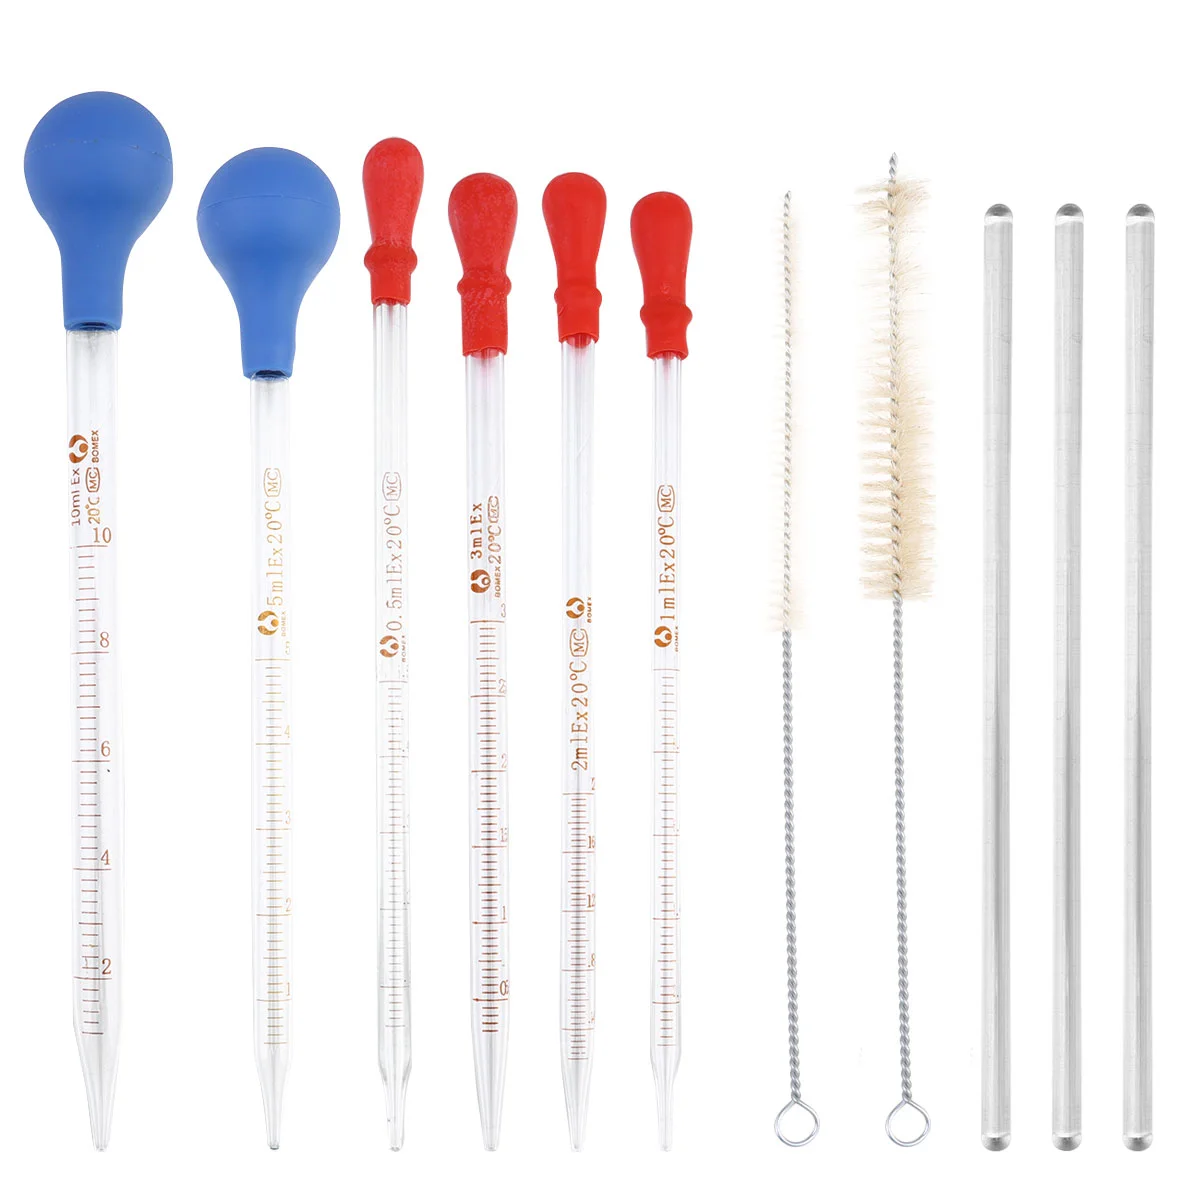 

Dropper Pipette Pipettes Liquid Graduated Transfer Droppers Eye Smooth Essential Laboratory Oils Calibrated Scale Brush Liquids